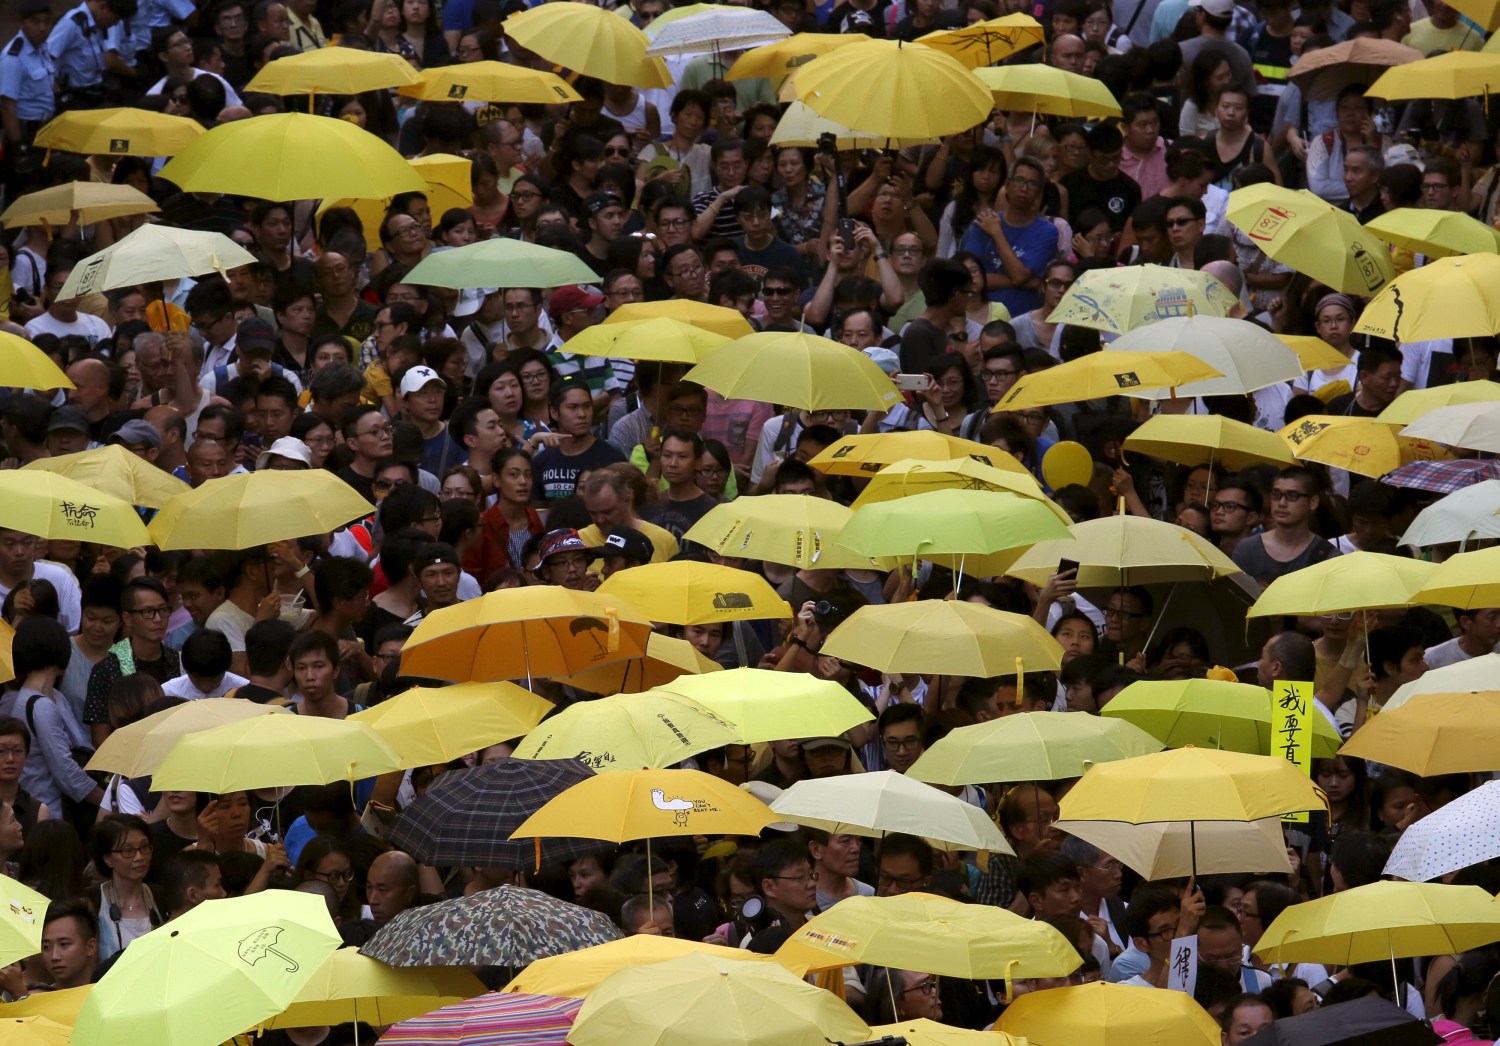 Pro-democracy protesters carrying yellow umbrellas, symbol of the Occupy Central civil disobedience movement, gather outside government headquarters in Hong Kong, China September 28, 2015. Monday marks the first anniversary of the Occupy Central or "umbrella" movement, demanding universal suffrage in the territory. REUTERS/Bobby Yip - RTX1SU40